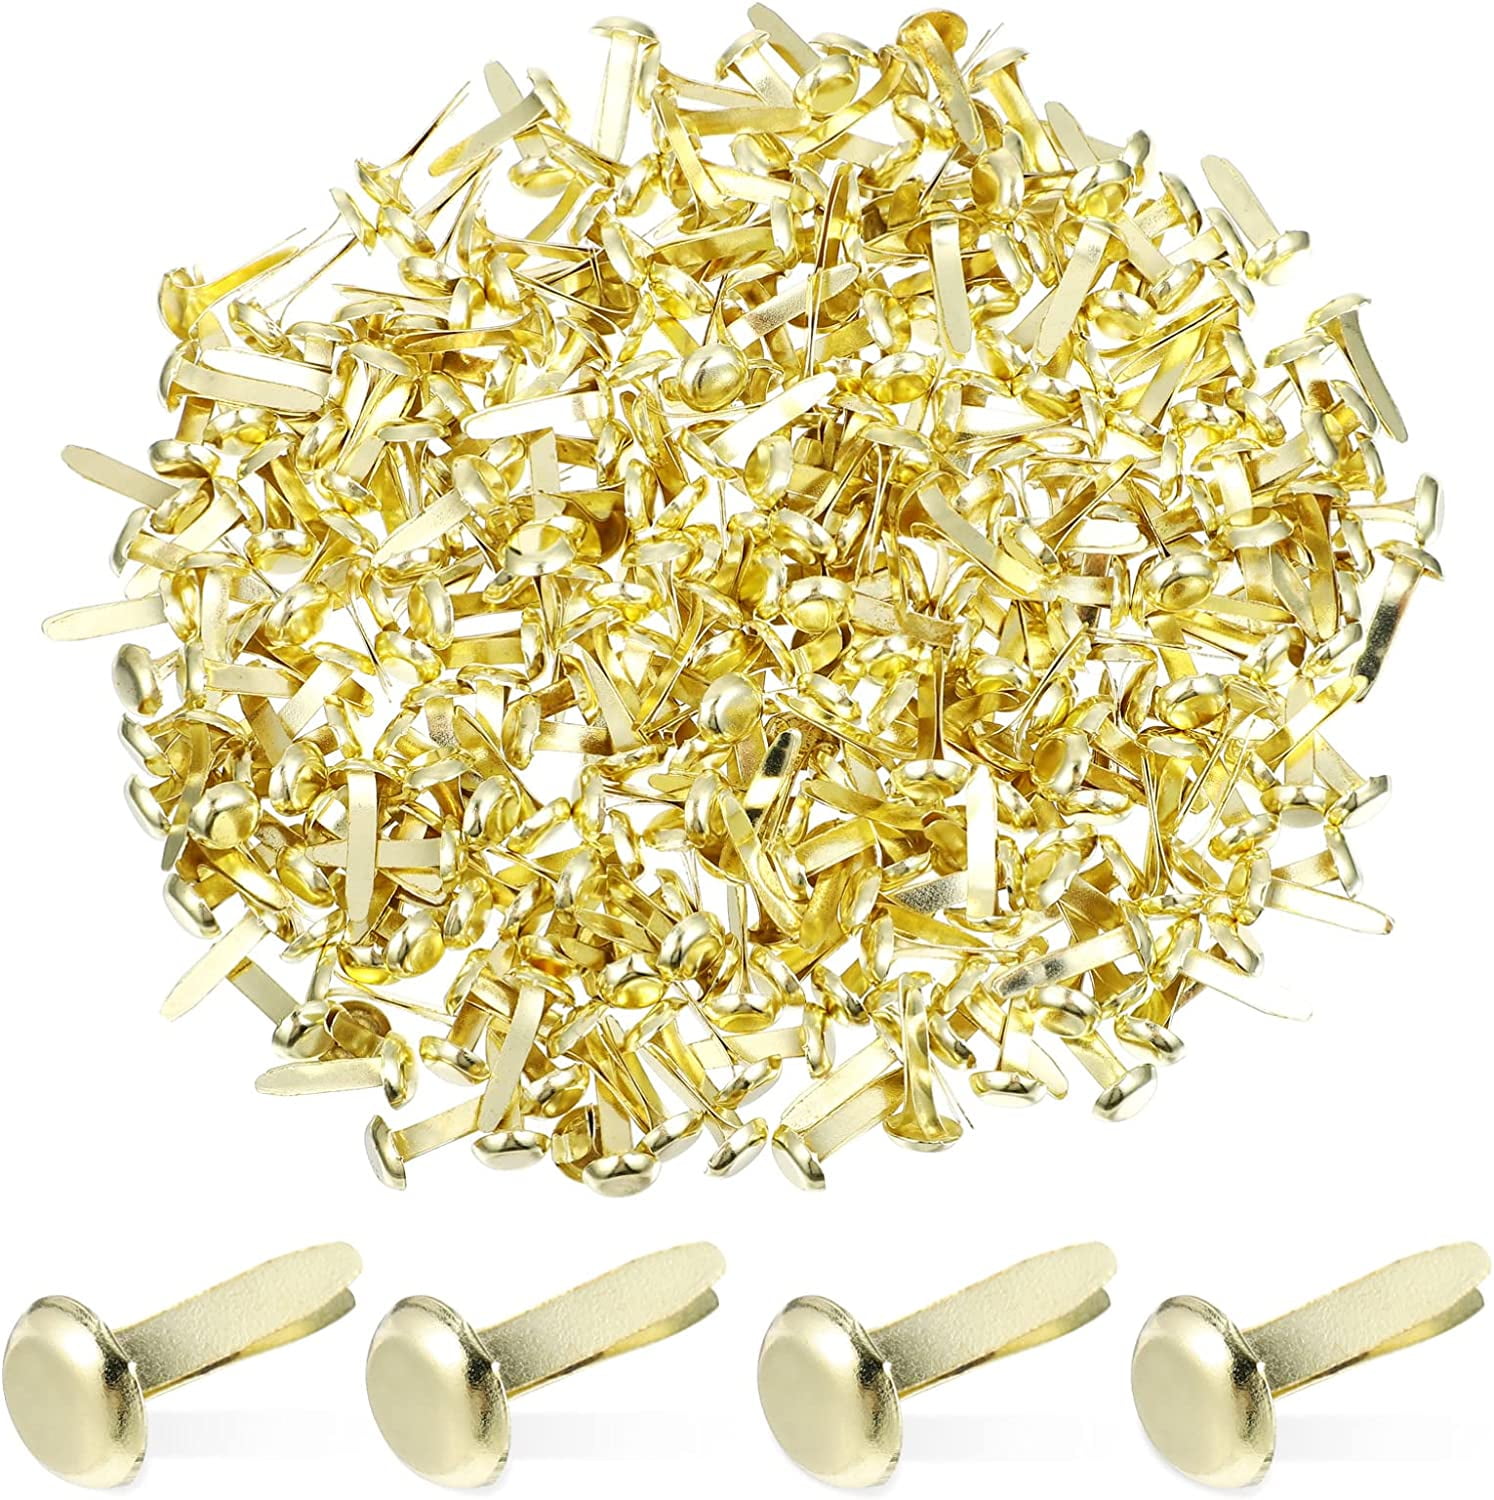 Uxcell 18x24mm Mini Brads Round Paper Fasteners for Art Crafting, Gold Tone 100Pack, Size: 18 mm x 24 mm